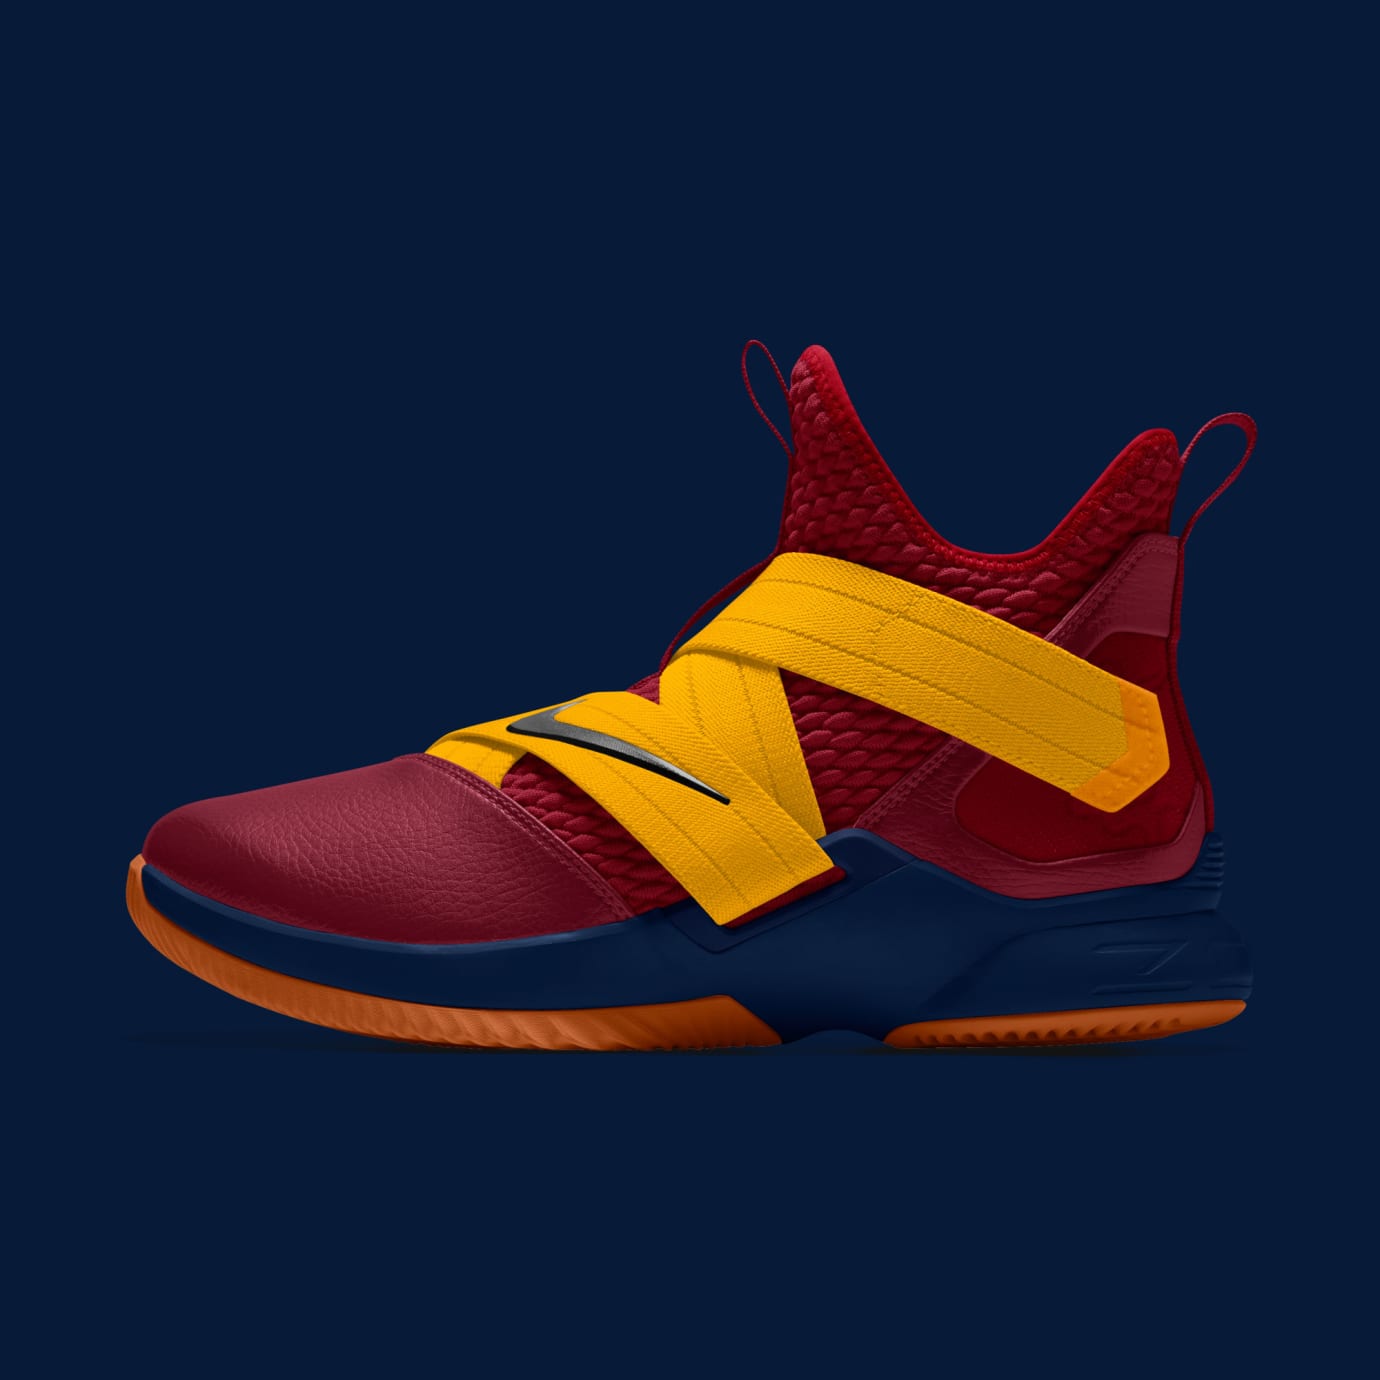 lebron soldier xii by you